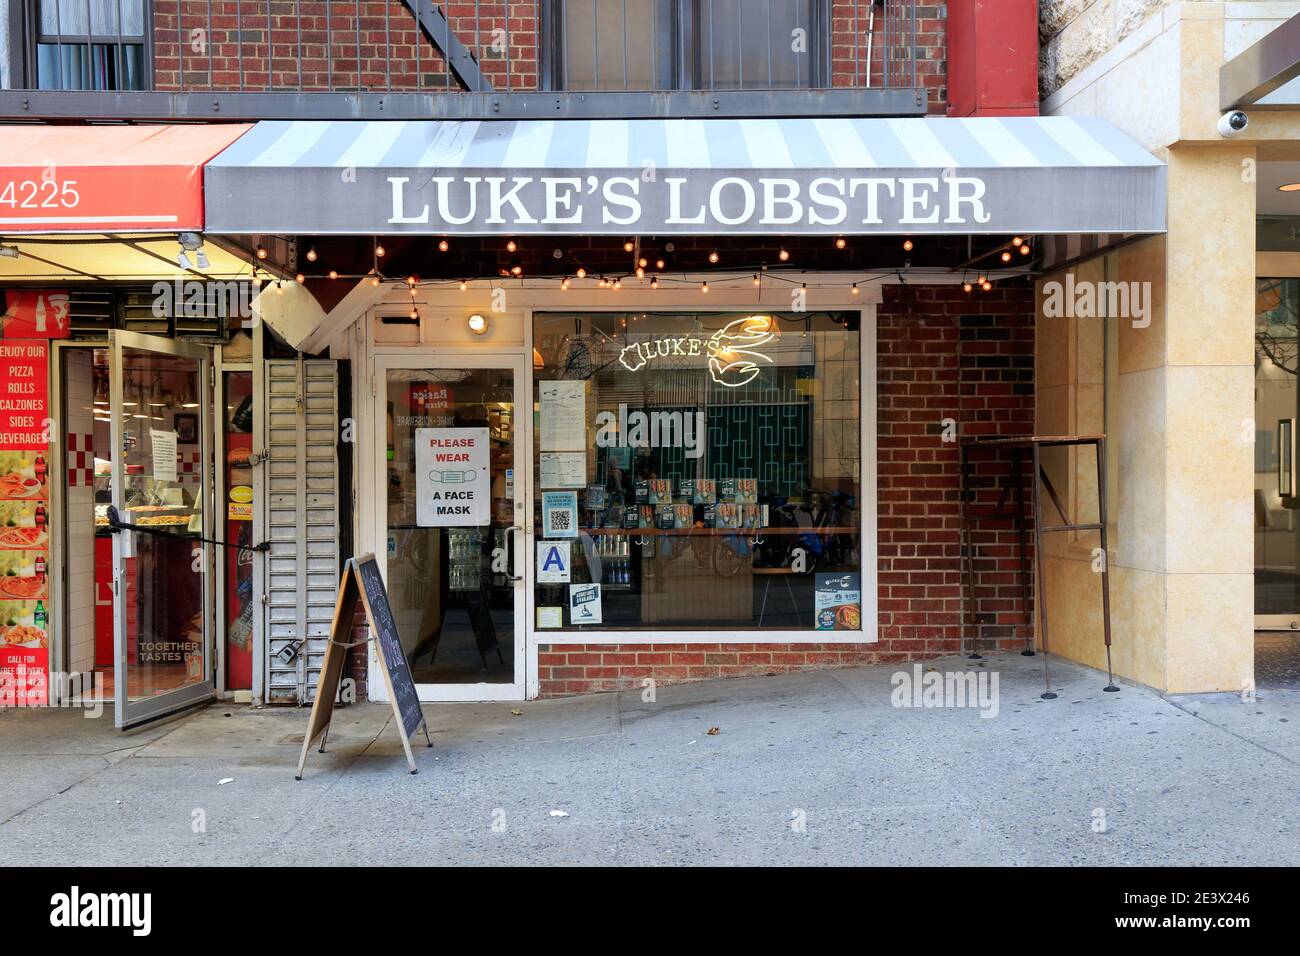 Luke's Lobster, 124 University Pl, New York, NYC storefront photo of a seafood chain in Manhattan's Union Square neighborhood. Stock Photo